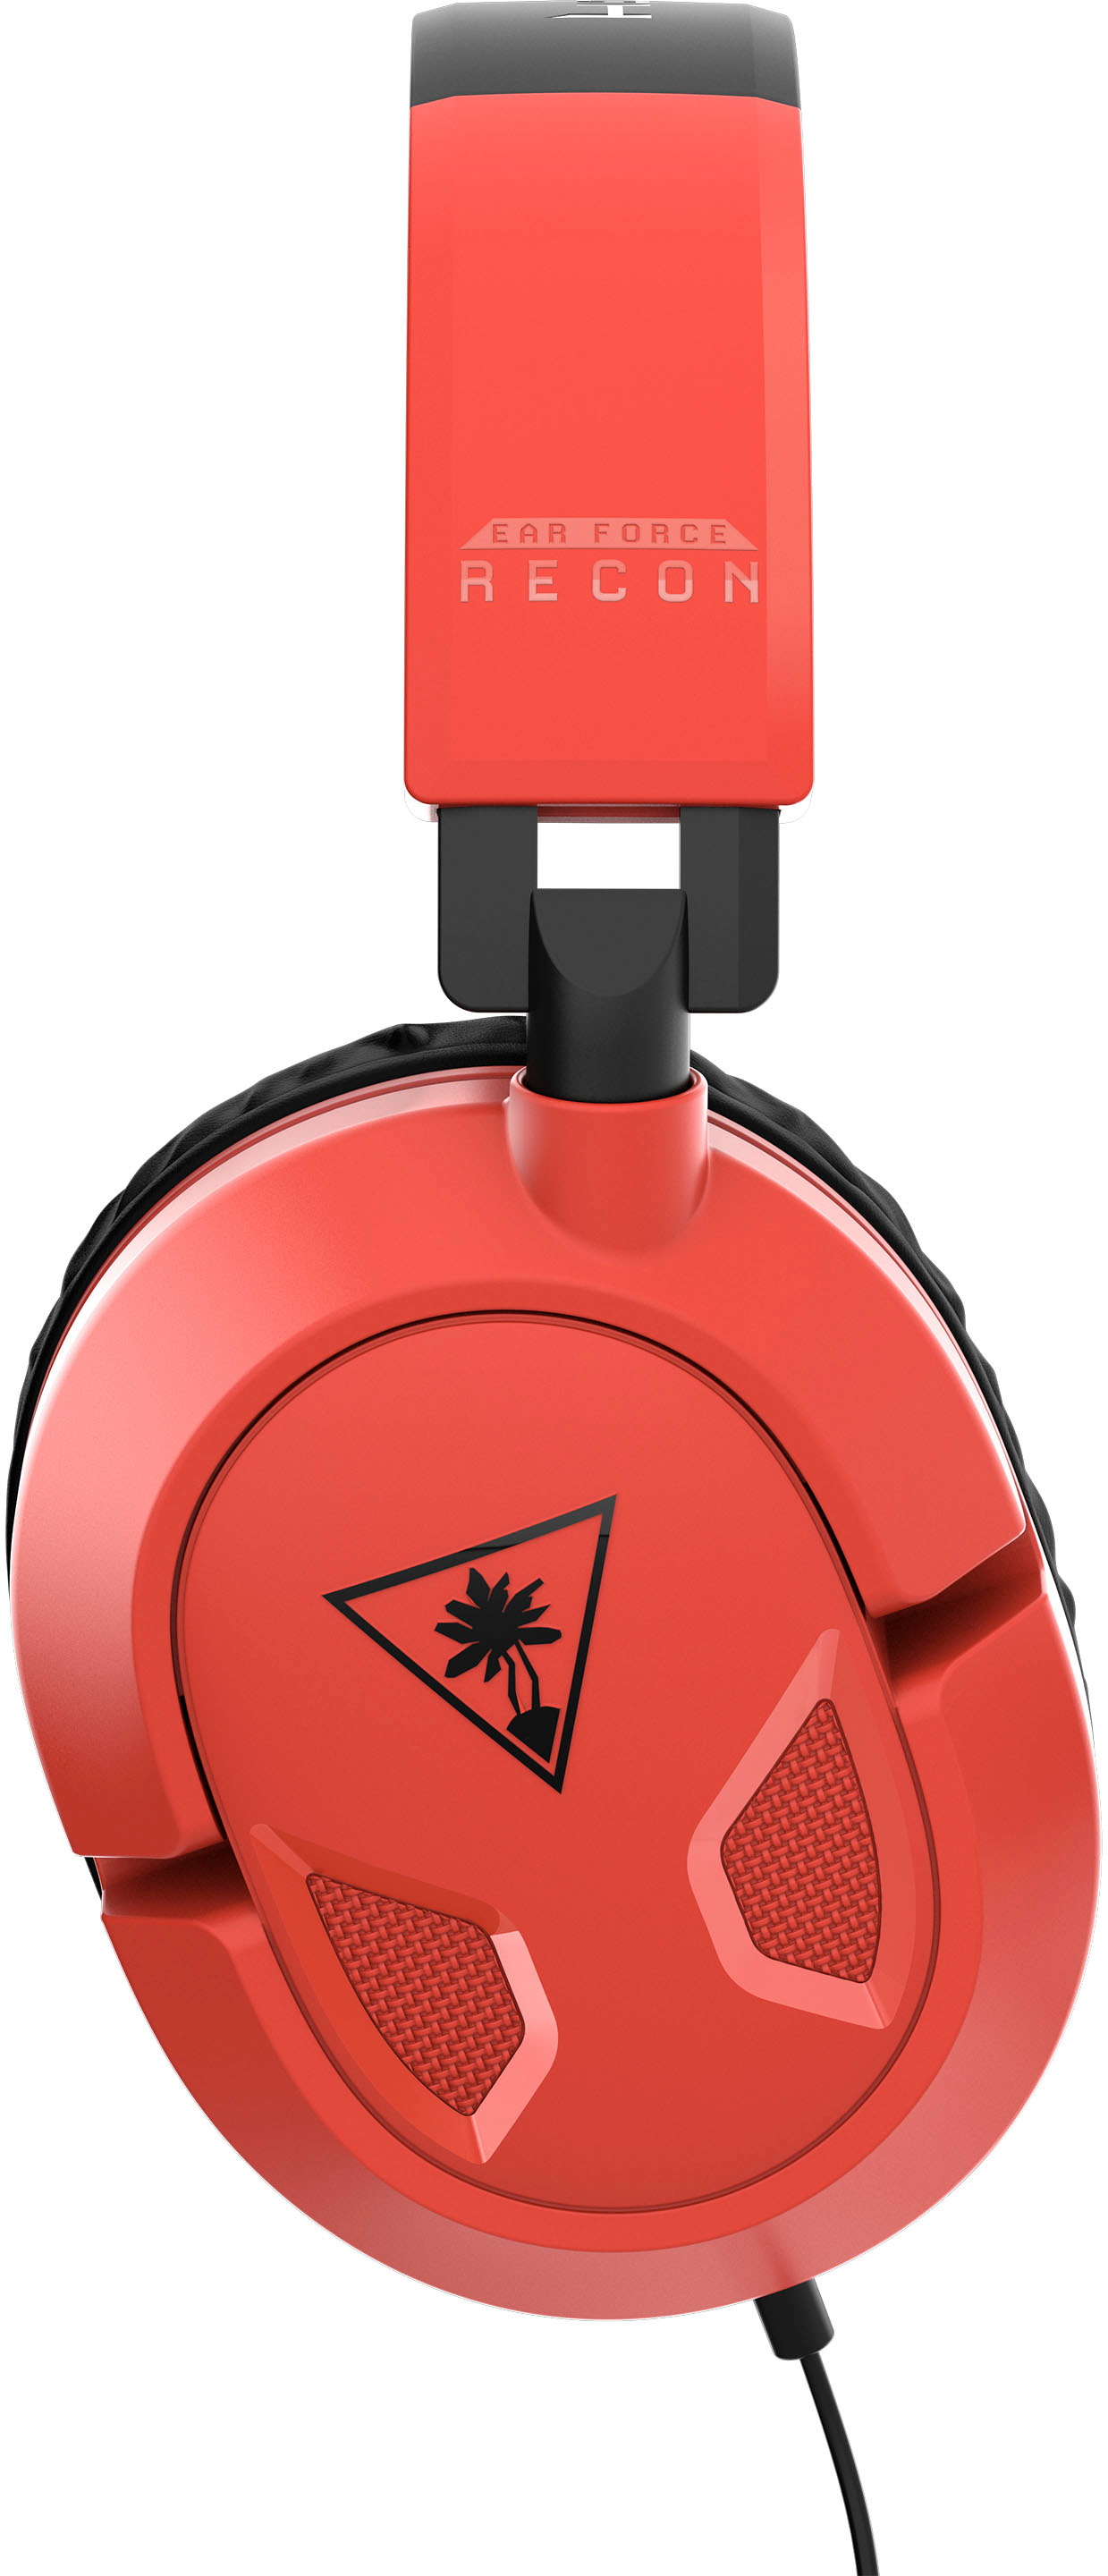 Turtle Beach Recon 50 Wired Gaming Headset for Nintendo Switch Red/Blue  TBS-8150-05 - Best Buy